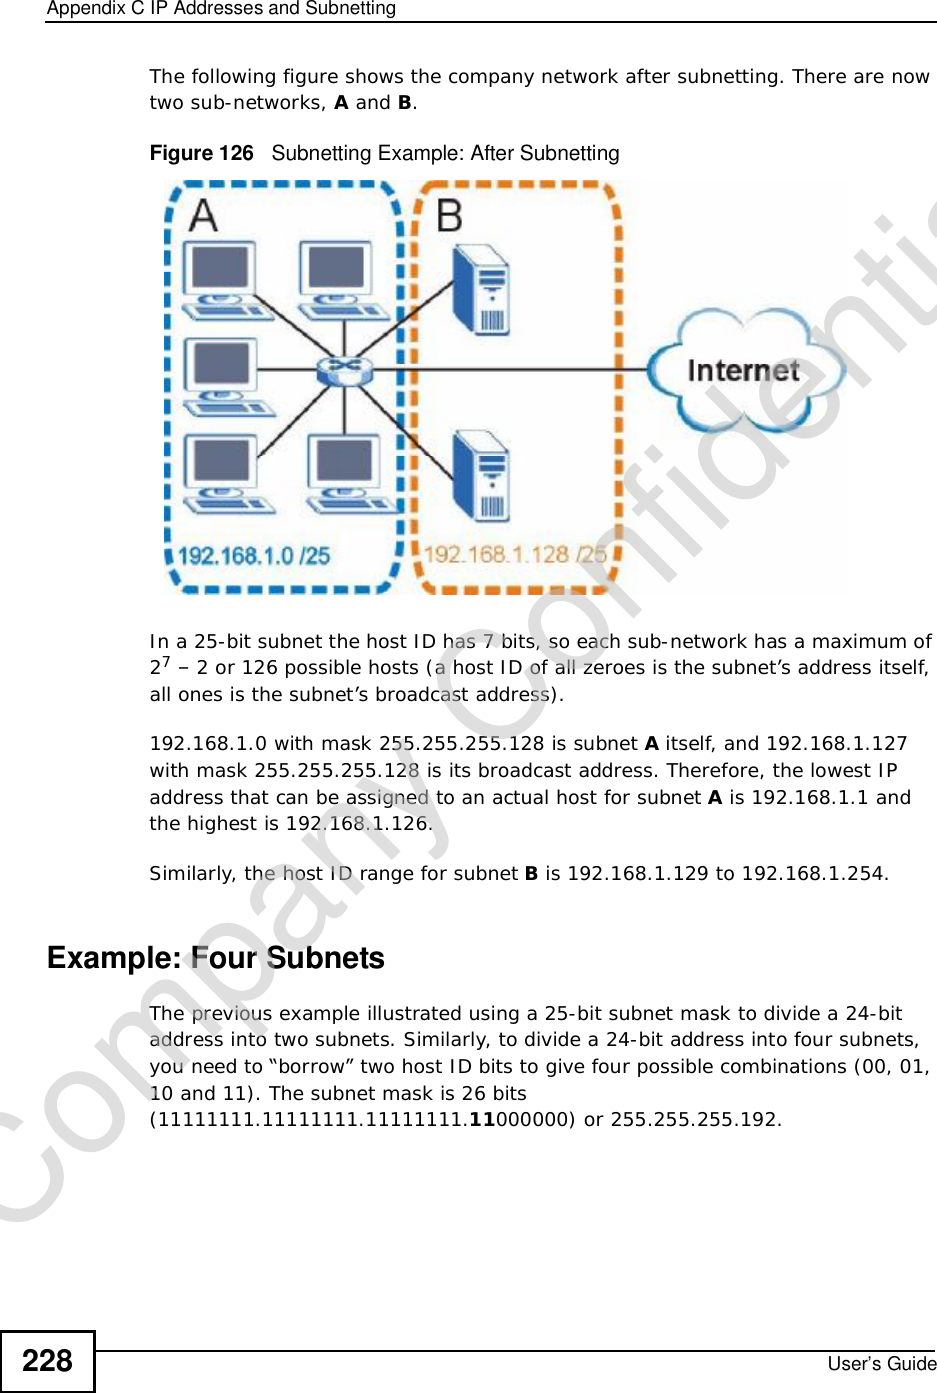 Appendix CIP Addresses and SubnettingUser’s Guide228The following figure shows the company network after subnetting. There are now two sub-networks, A and B.Figure 126   Subnetting Example: After SubnettingIn a 25-bit subnet the host ID has 7 bits, so each sub-network has a maximum of 27 – 2 or 126 possible hosts (a host ID of all zeroes is the subnet’s address itself, all ones is the subnet’s broadcast address).192.168.1.0 with mask 255.255.255.128 is subnet A itself, and 192.168.1.127 with mask 255.255.255.128 is its broadcast address. Therefore, the lowest IP address that can be assigned to an actual host for subnet A is 192.168.1.1 and the highest is 192.168.1.126. Similarly, the host ID range for subnet B is 192.168.1.129 to 192.168.1.254.Example: Four Subnets The previous example illustrated using a 25-bit subnet mask to divide a 24-bit address into two subnets. Similarly, to divide a 24-bit address into four subnets, you need to “borrow” two host ID bits to give four possible combinations (00, 01, 10 and 11). The subnet mask is 26 bits (11111111.11111111.11111111.11000000) or 255.255.255.192. Company Confidential